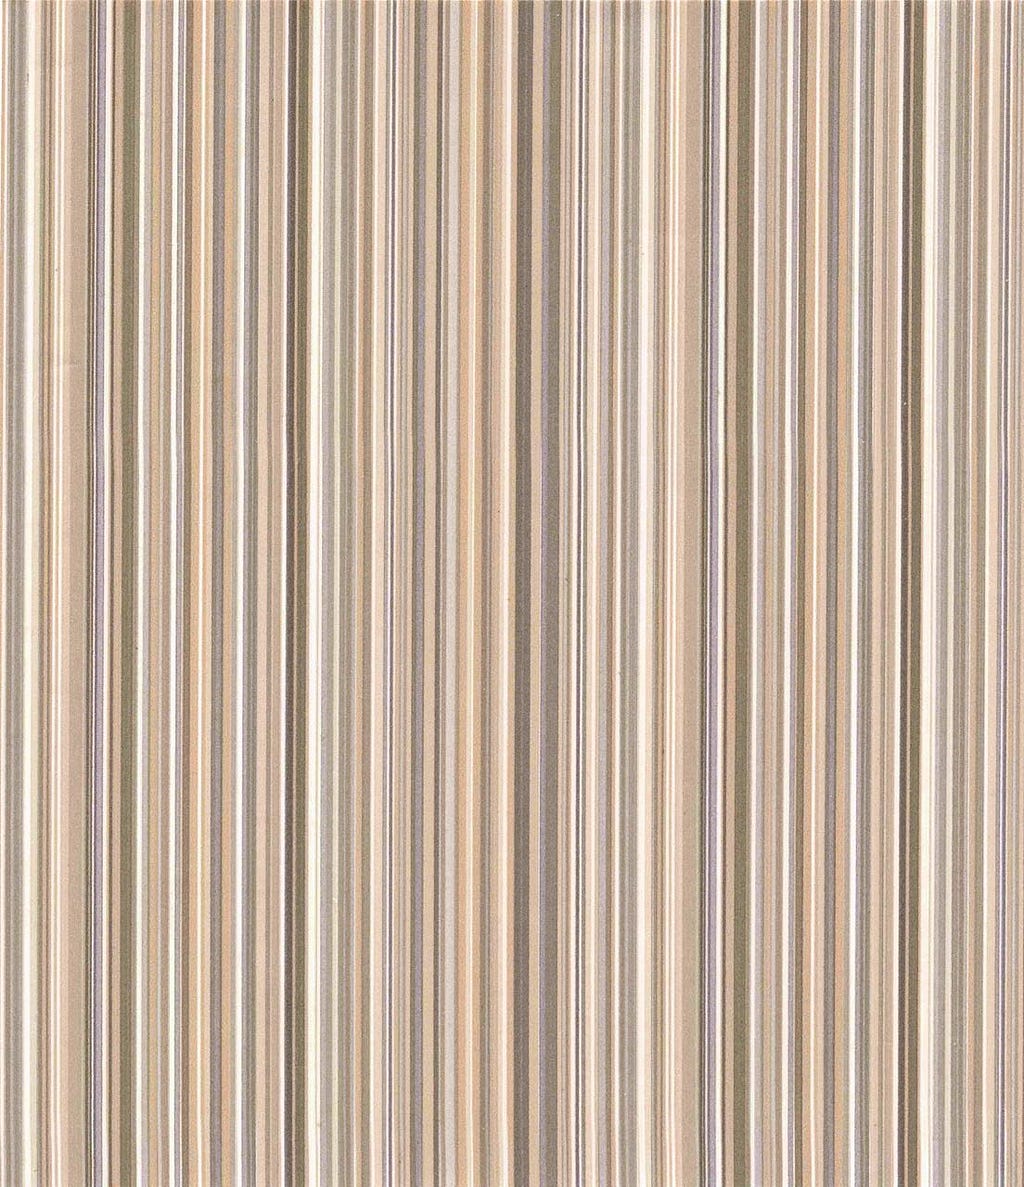 CONTRACT & RESIDENTIAL VINYL WALLCOVERING WALLPAPER
TEROMA 35750